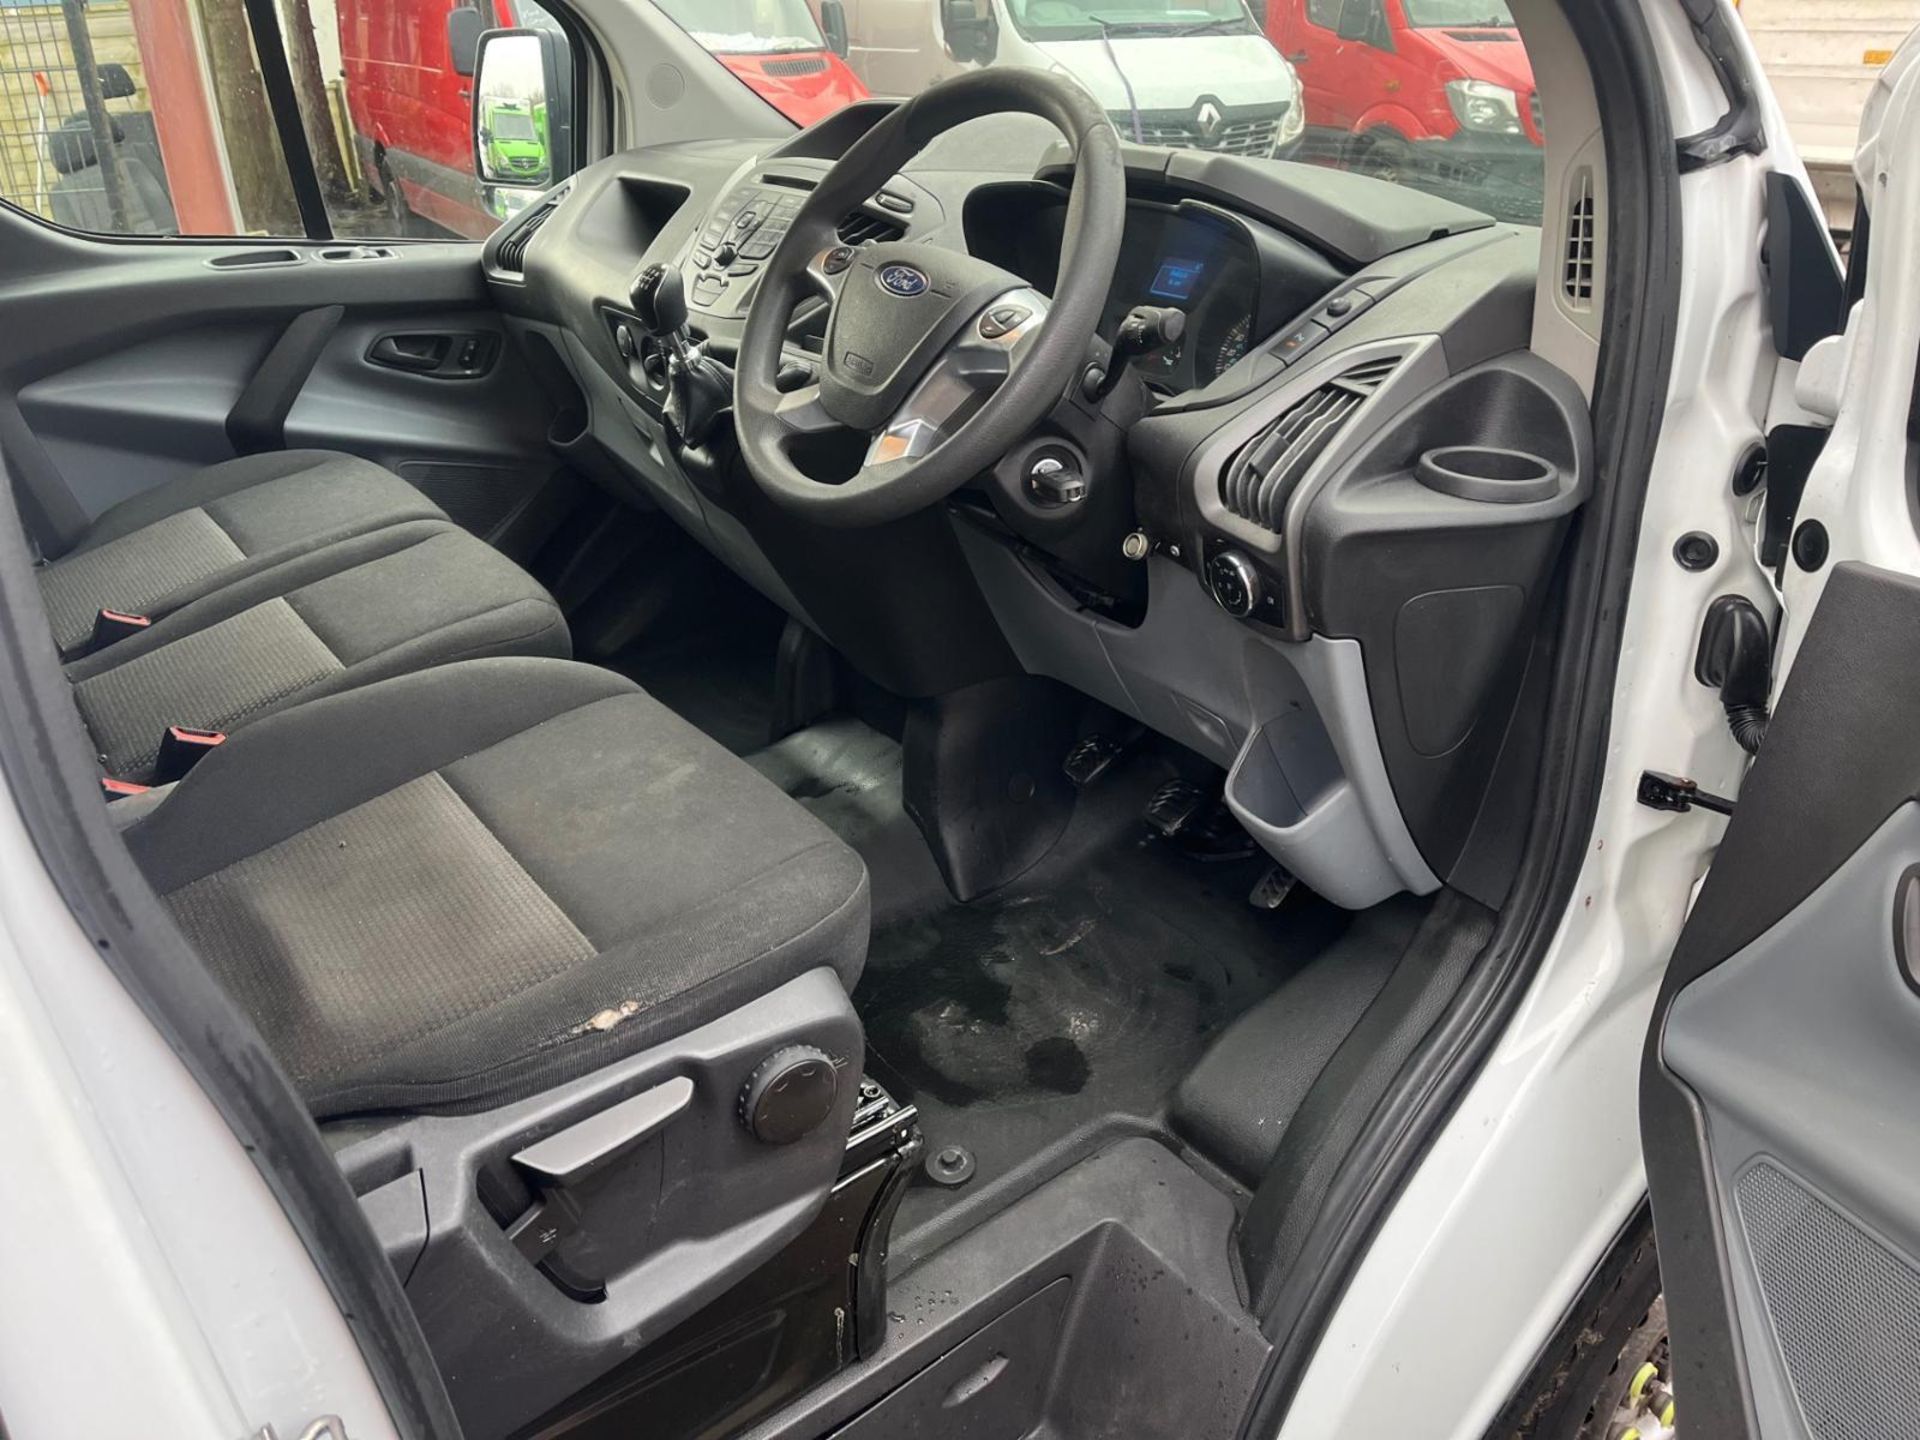 2018 FORD TRANSIT CUSTOM TDCI 130 L1 H1 SWB PANEL VAN ->>>SPECIAL CLEARANCE<<< - Image 9 of 15